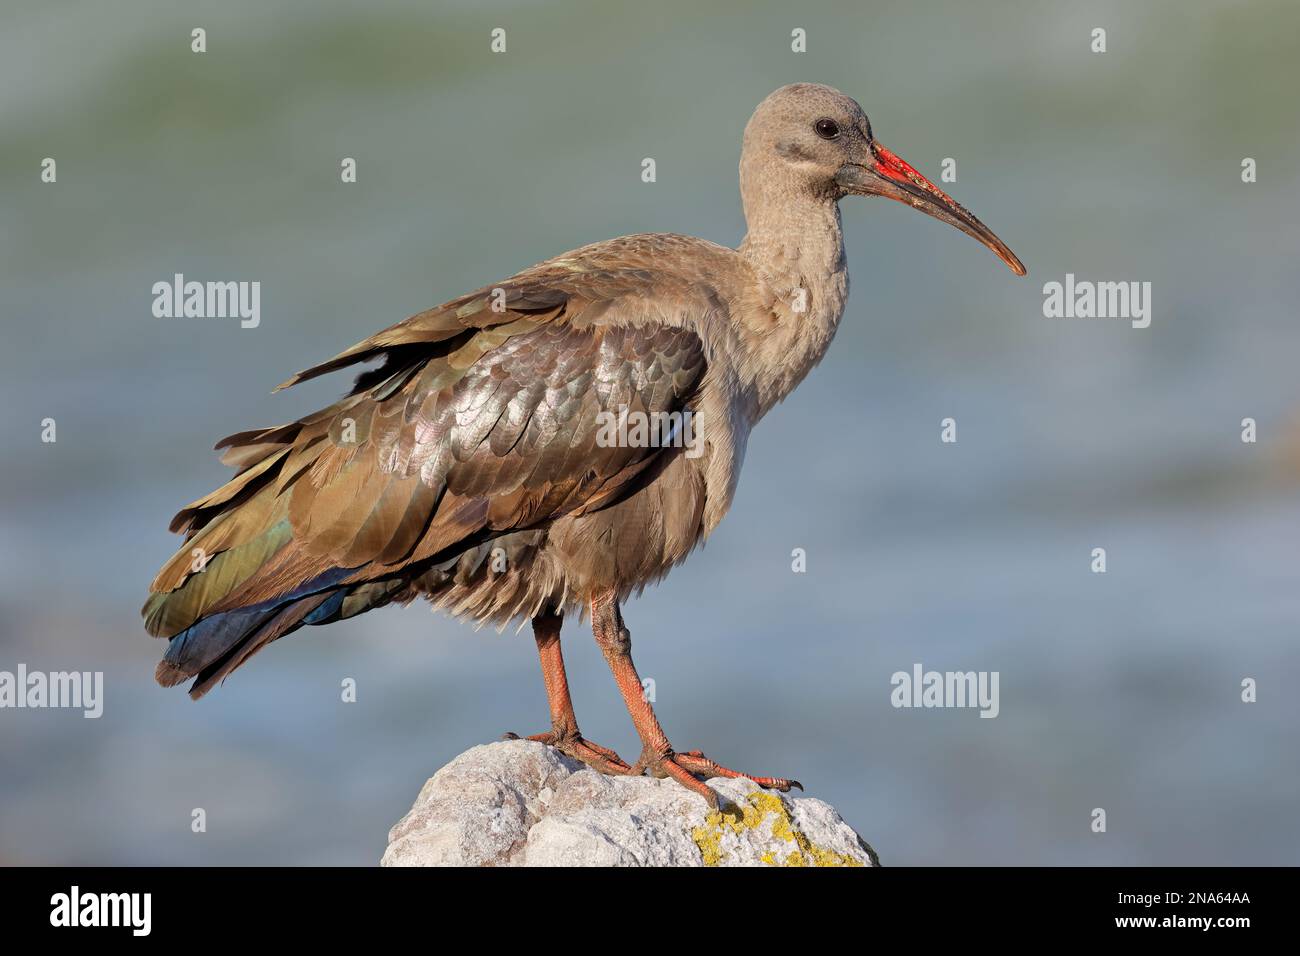 A hadeda ibis (Bostrychia hagedash) perched on a rock, South Africa Stock Photo